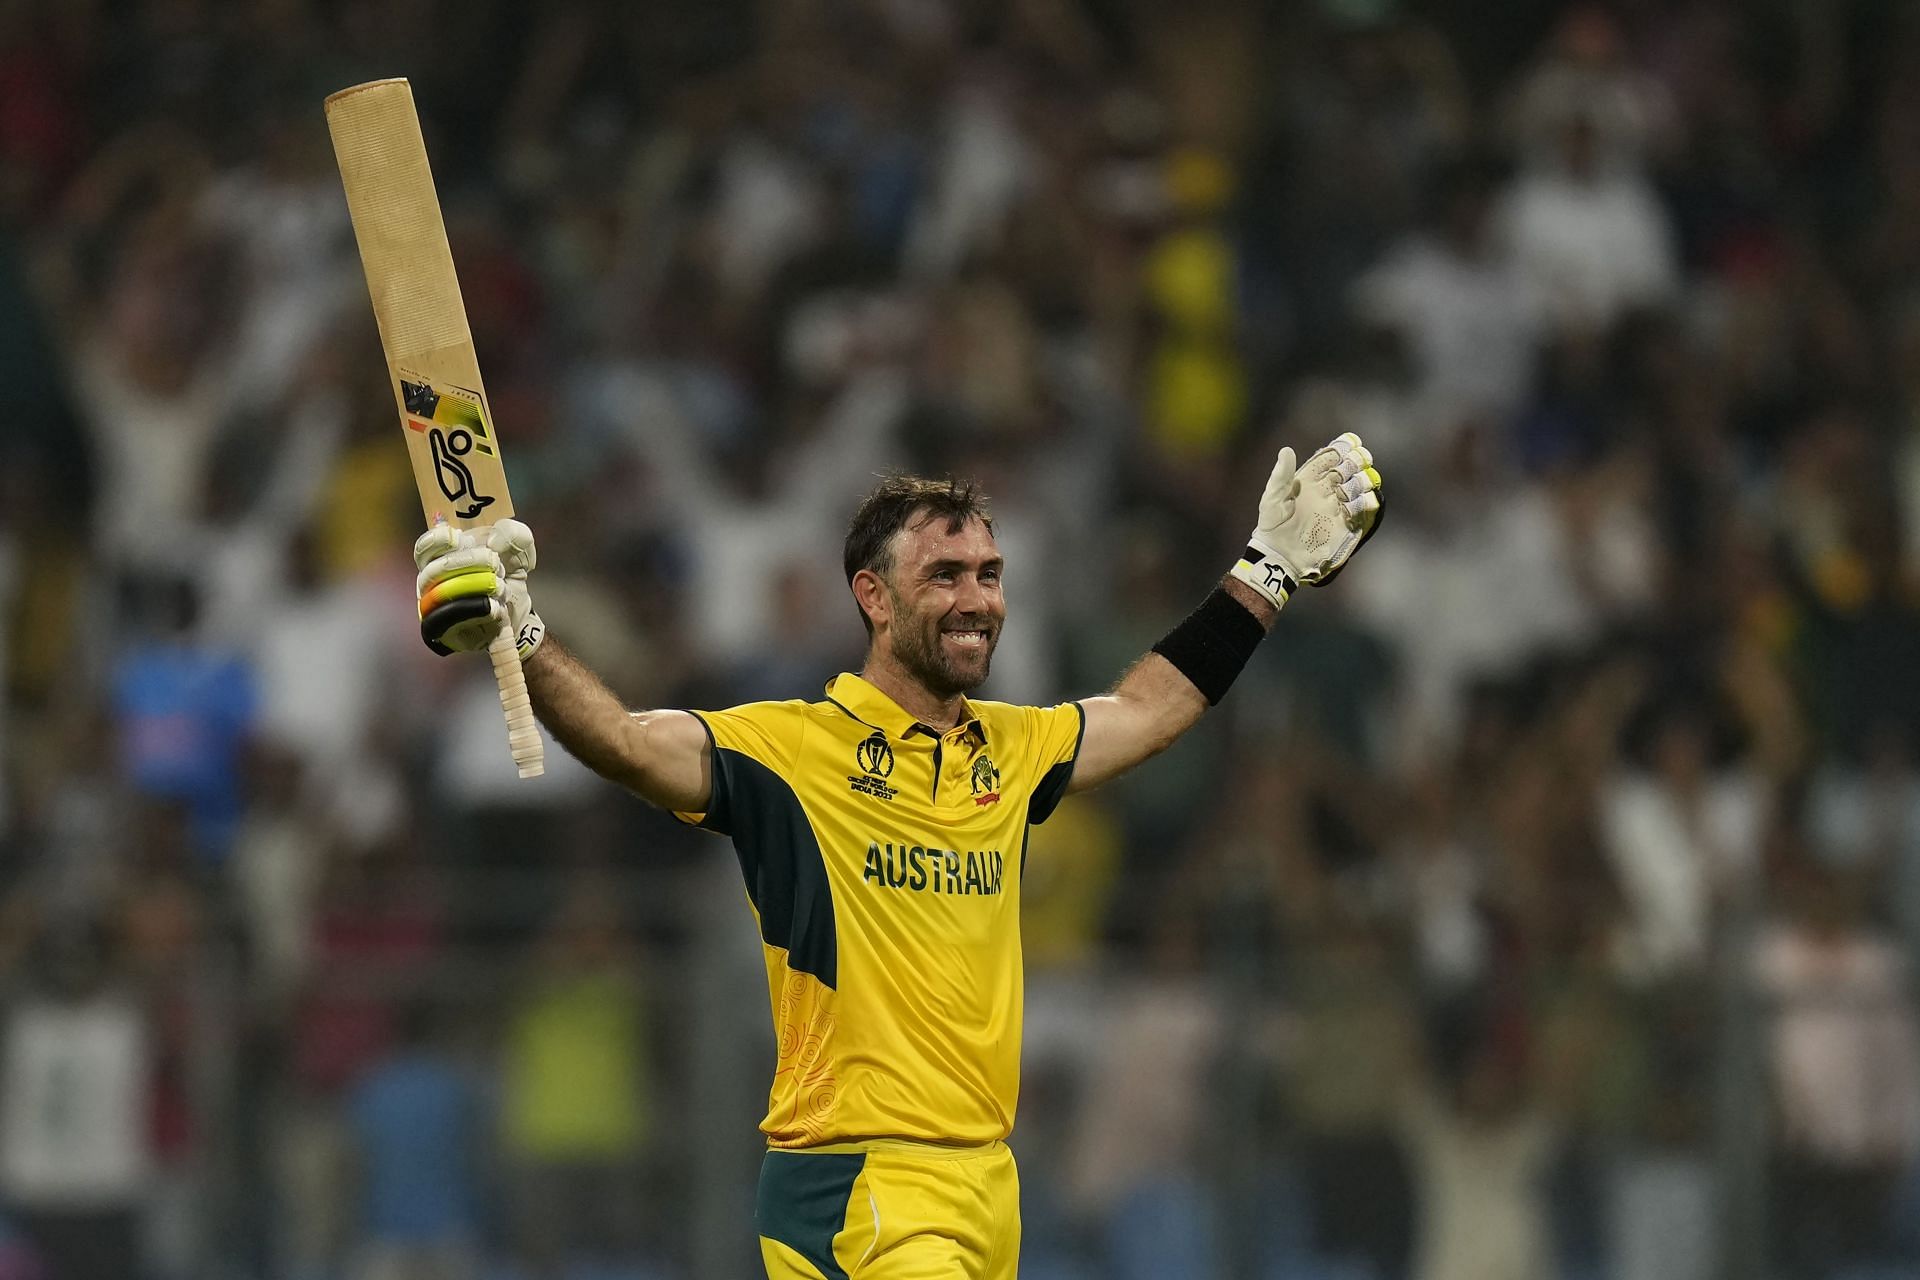 Glenn Maxwell with a bright smile after his heroics vs Afghanistan [Getty Images]